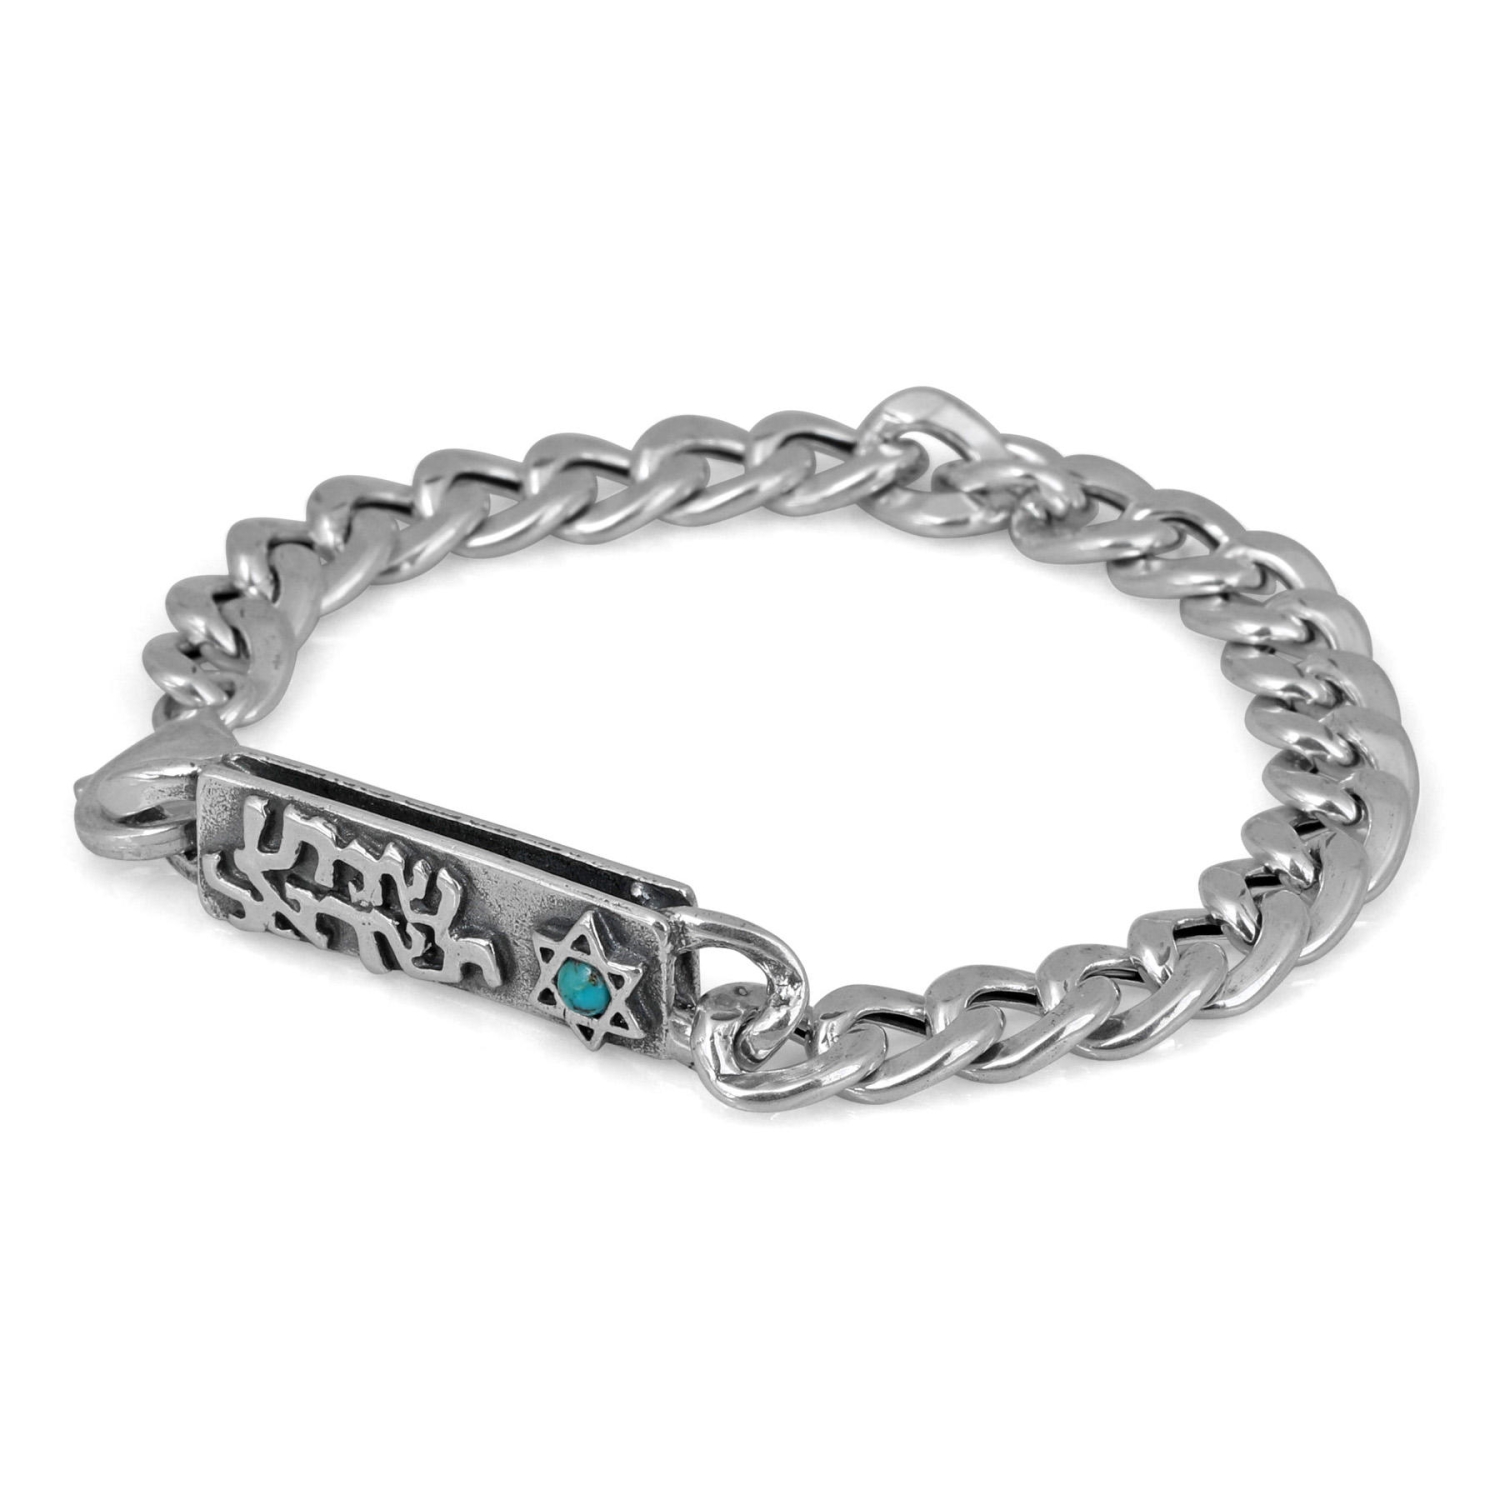 Shema Yisrael: Sterling Silver Bracelet with Star of David - 1